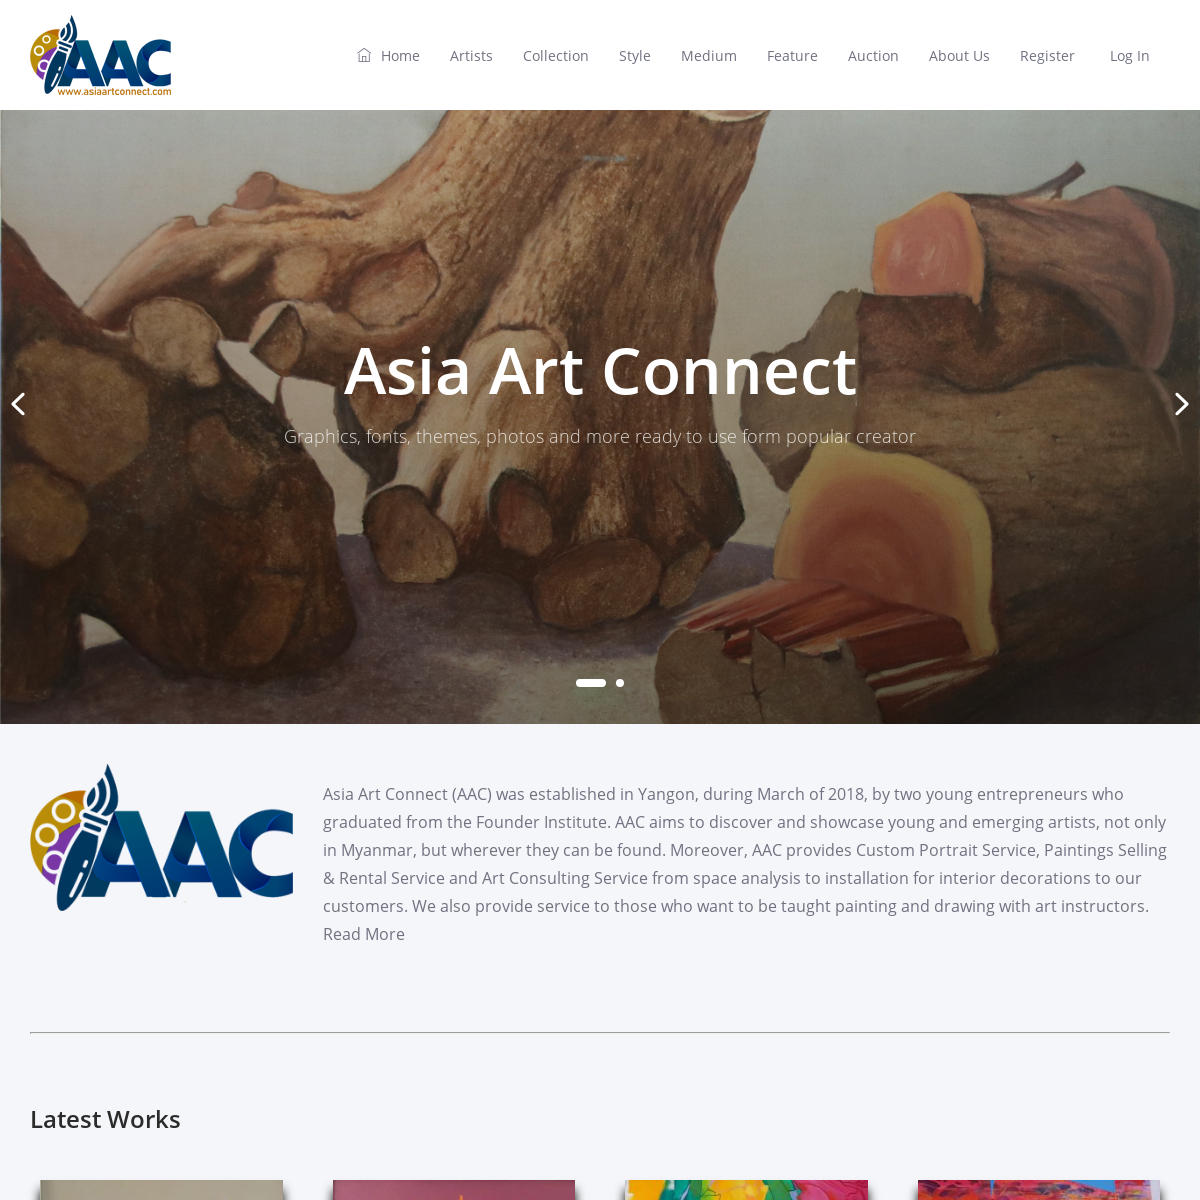 A complete backup of asiaartconnect.com